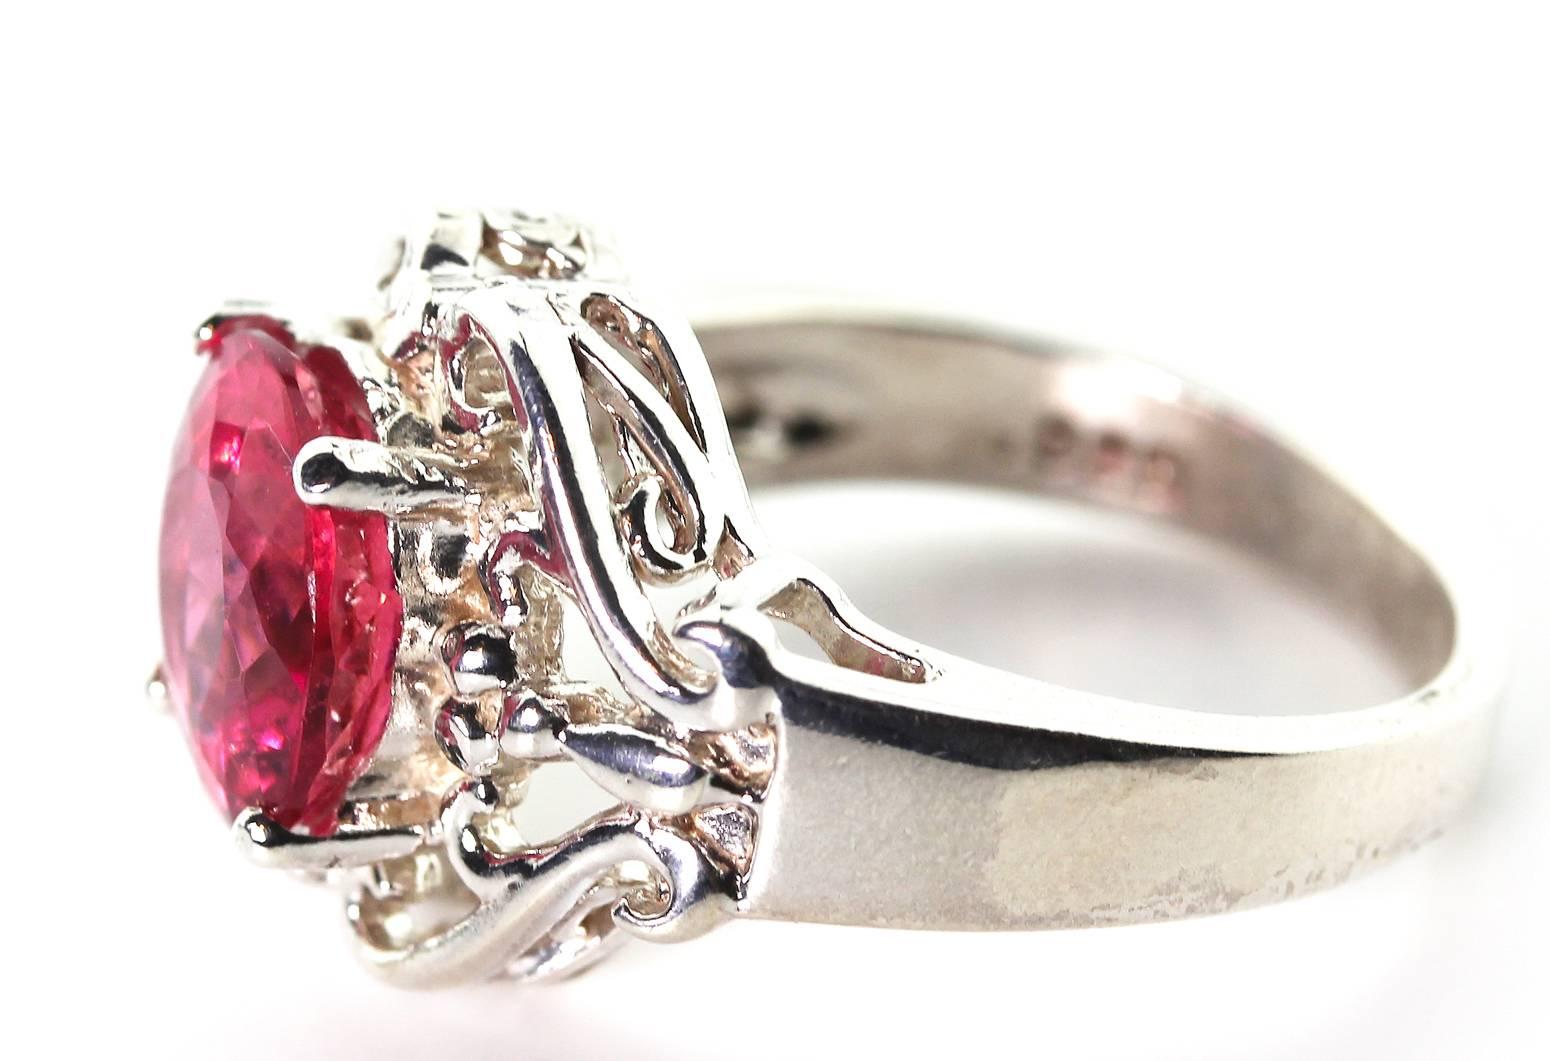 This unique natural glisteningly beautiful 2.74 Carat brilliantly reddypink / pinkyred handmade Tourmaline ring is very rare and stands out like a lighthouse on your finger. Perfect for day into evening events.
Size:  9 mm round
Ring:  Sterling